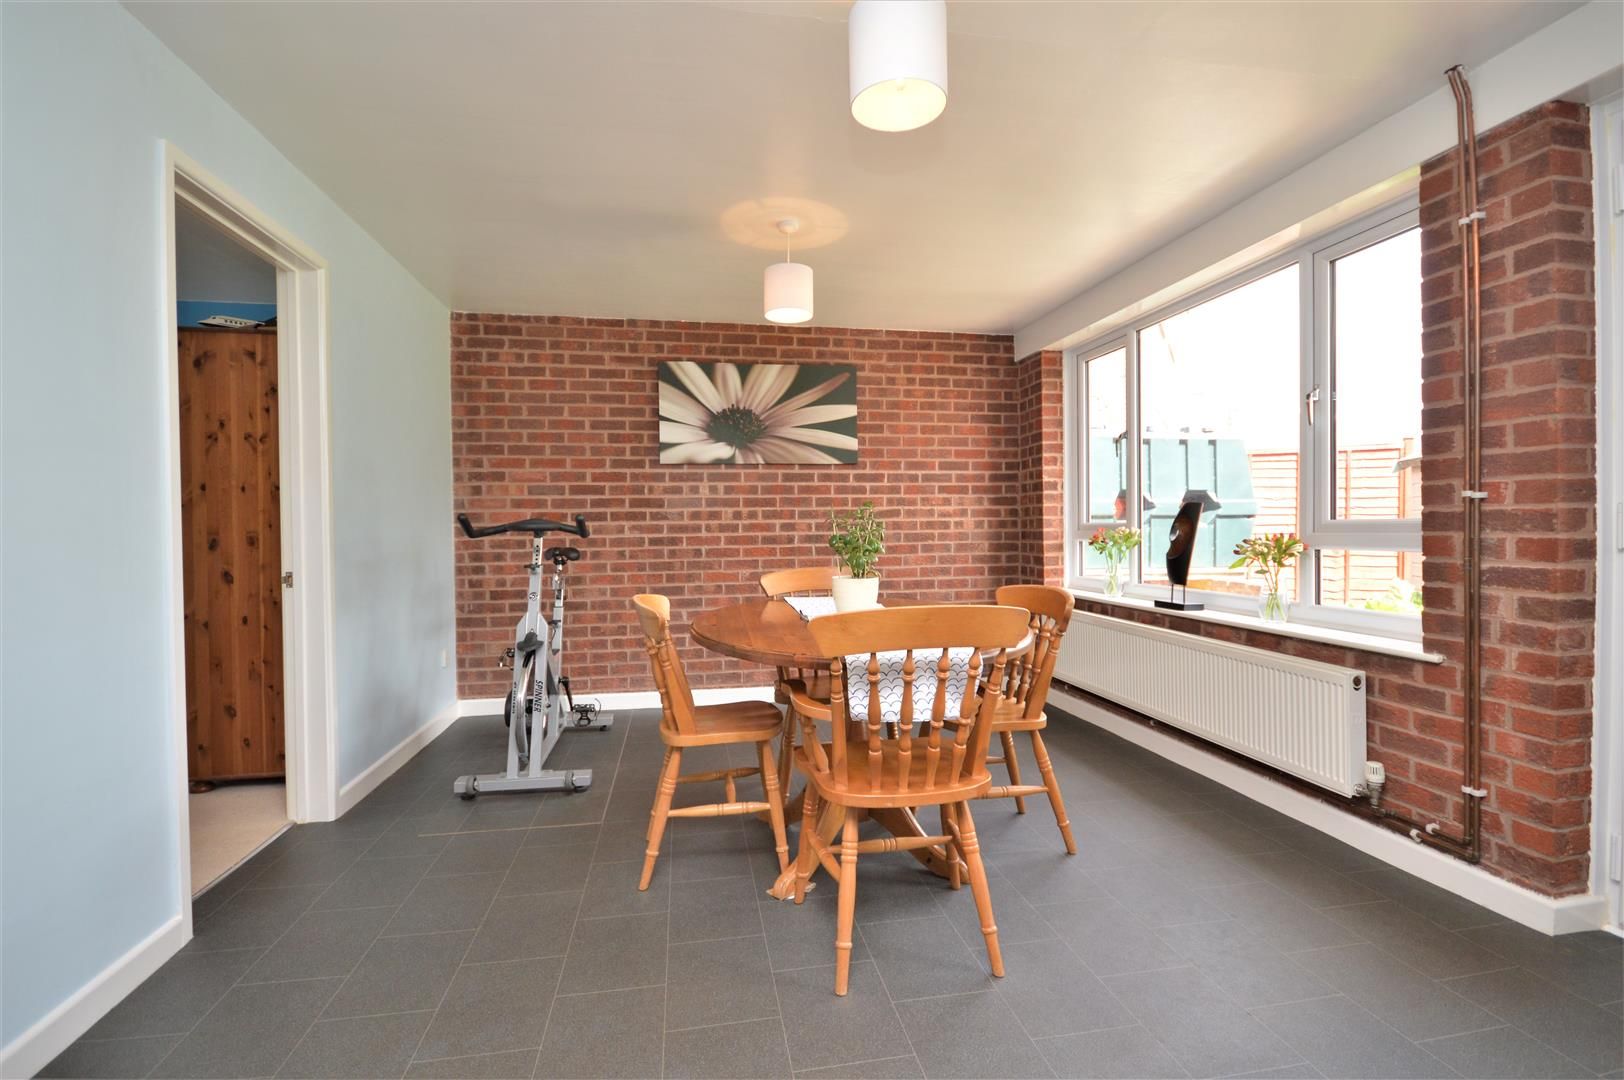 3 bed detached for sale in Kings Caple  - Property Image 6